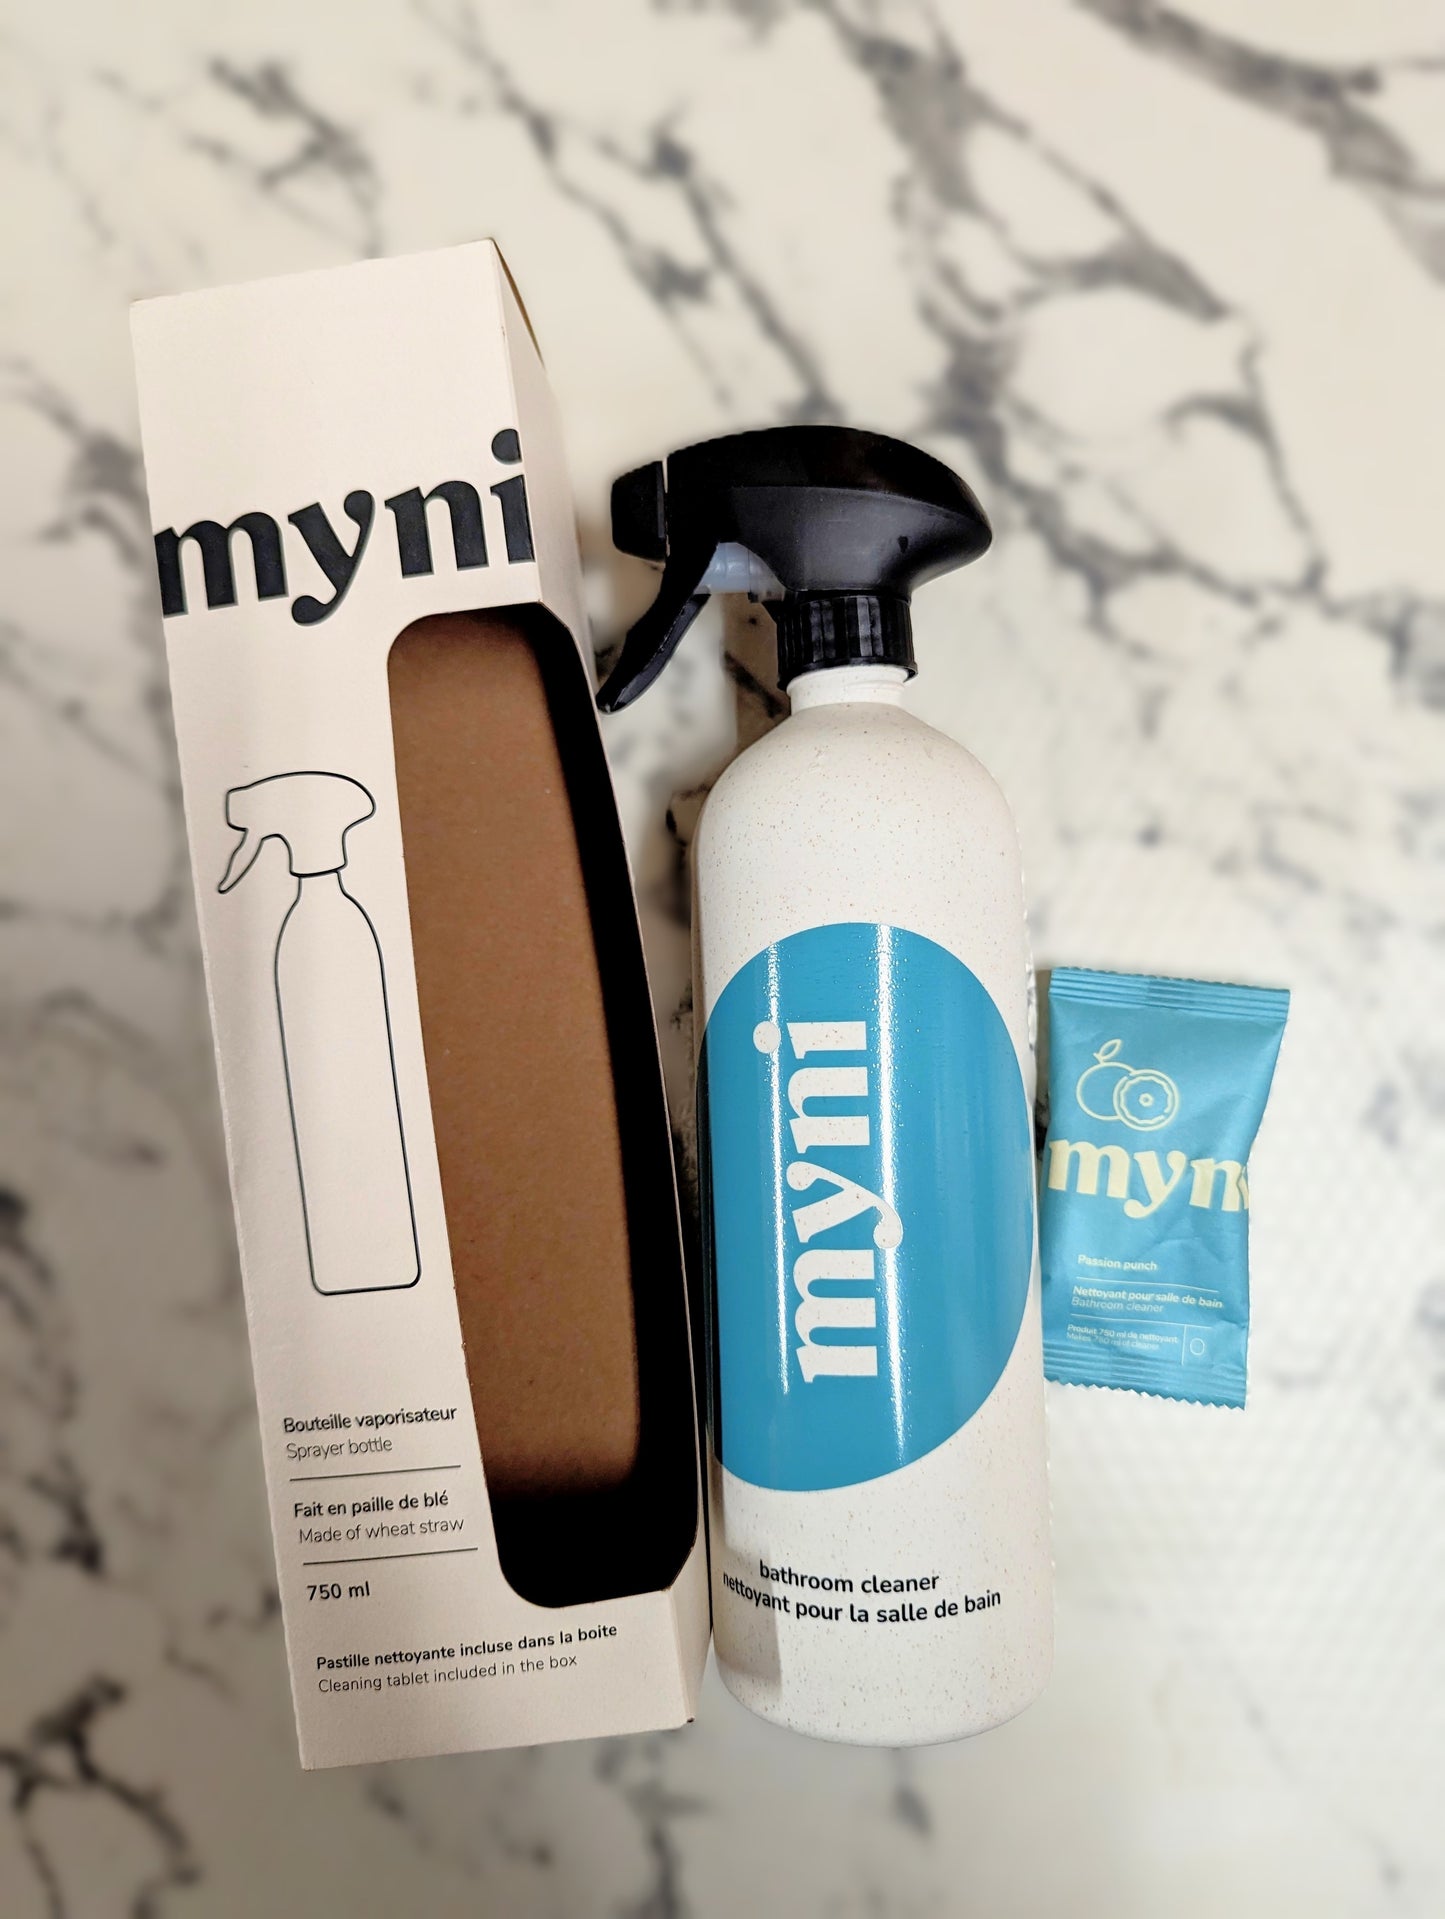 Myni Reusable Wheat Straw Spray Bottle And Bathroom Cleaning Pod